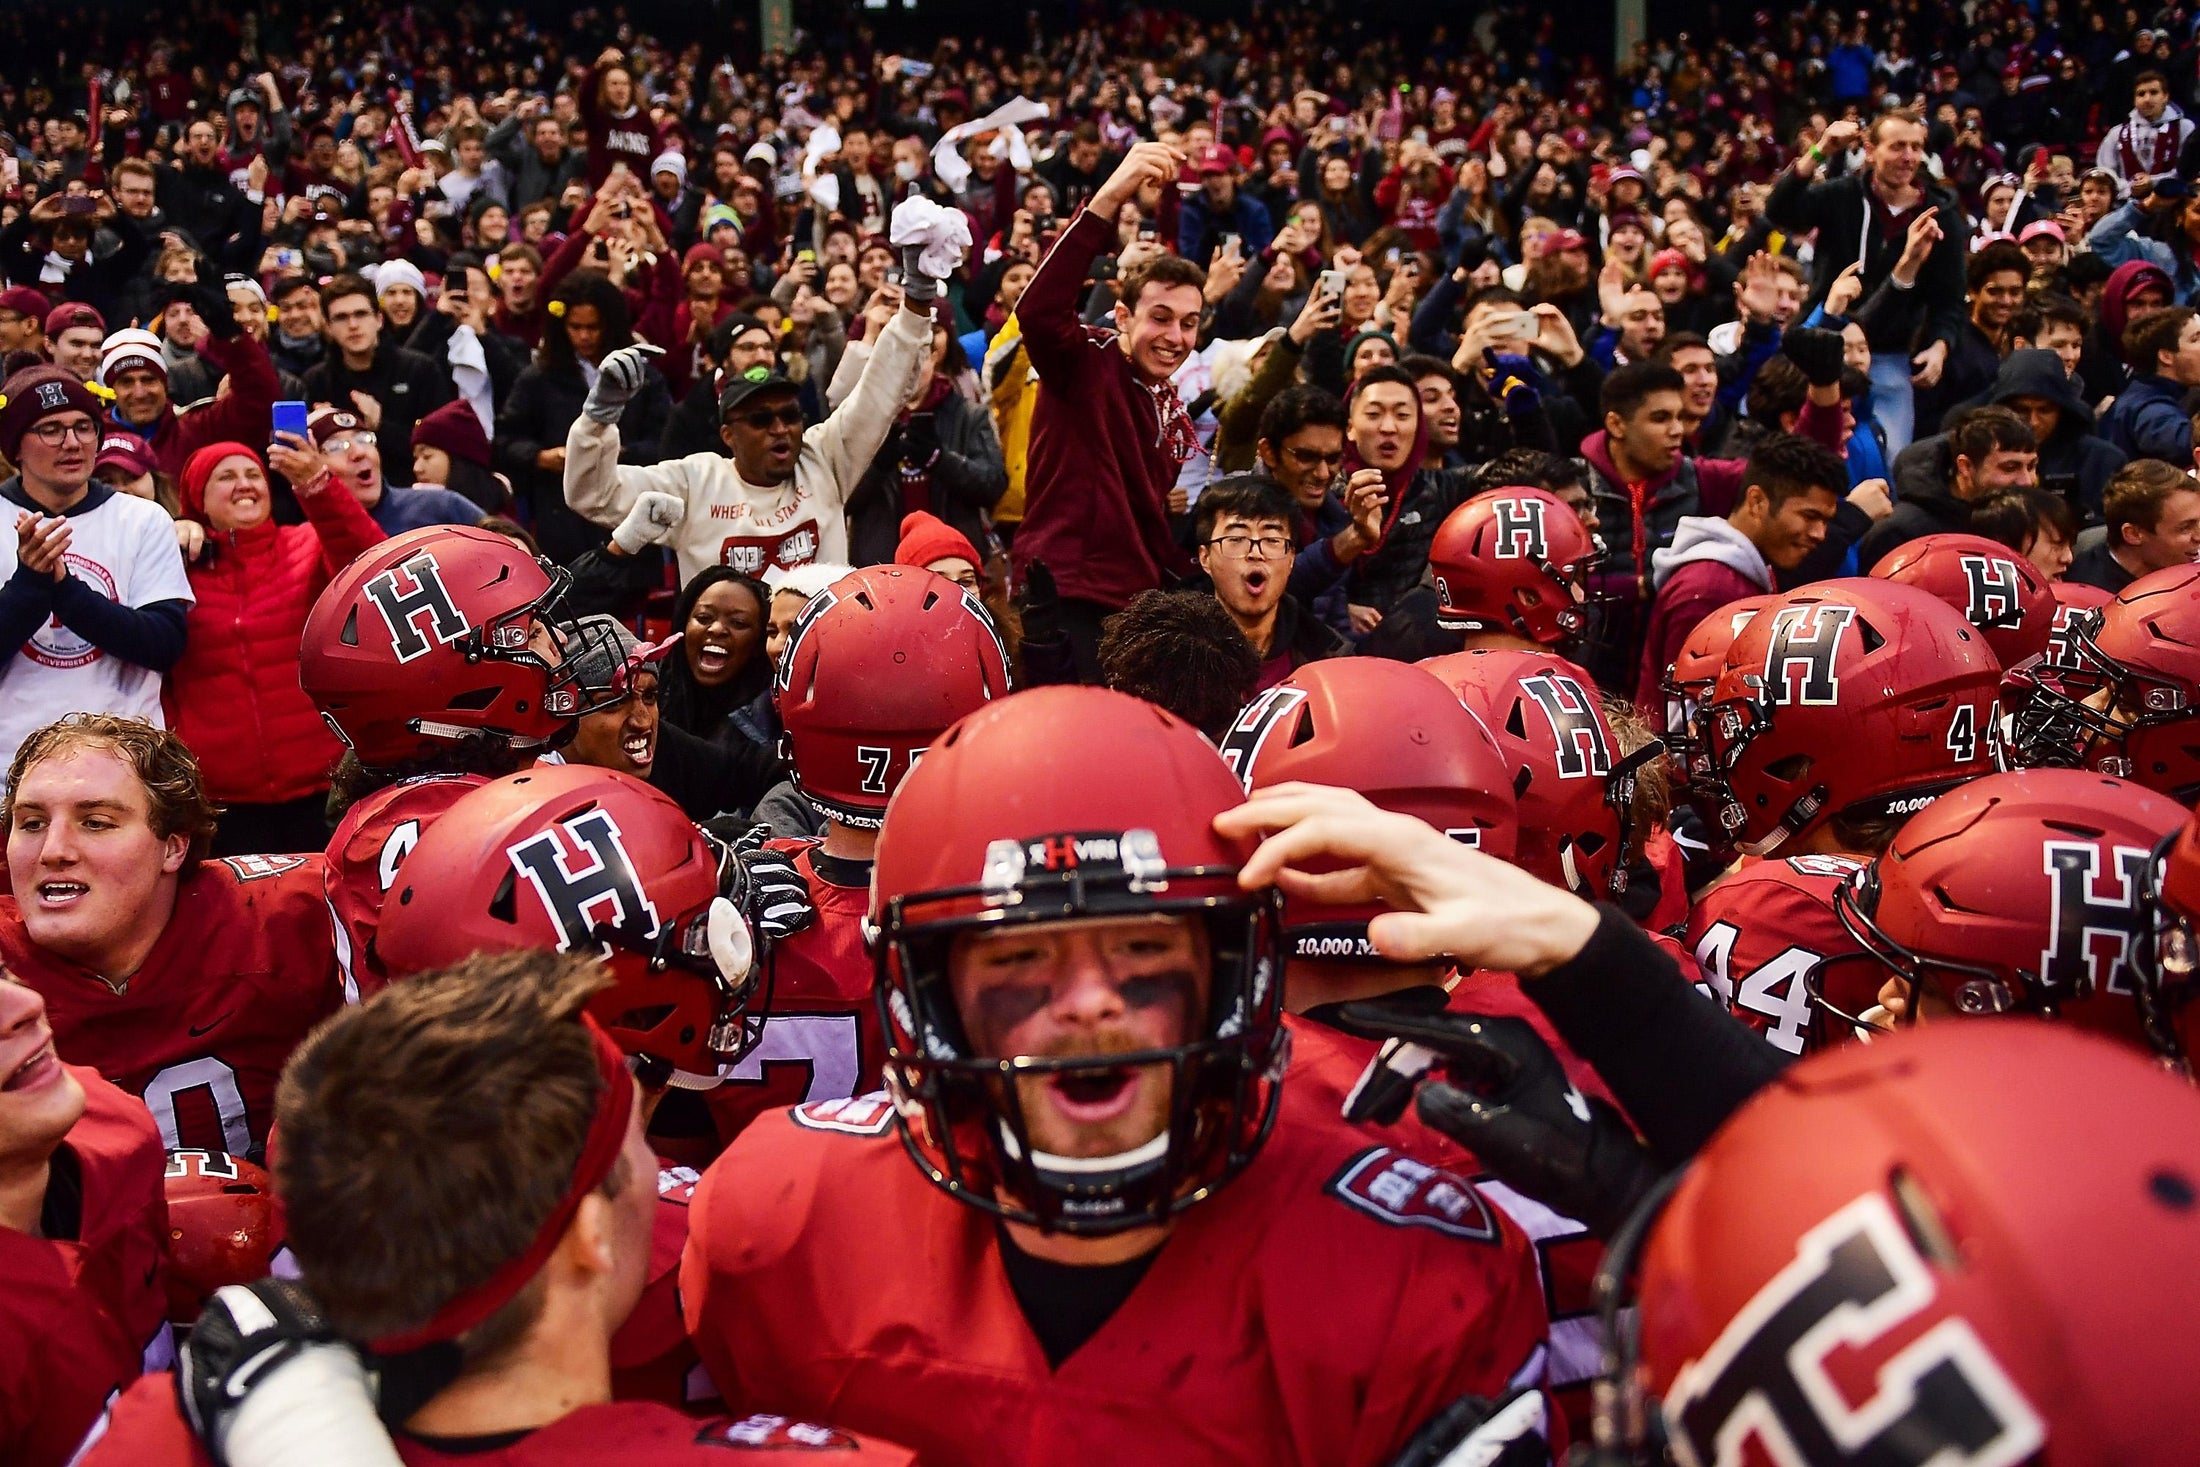 Ivy League suspends fall sports schedule, including football.